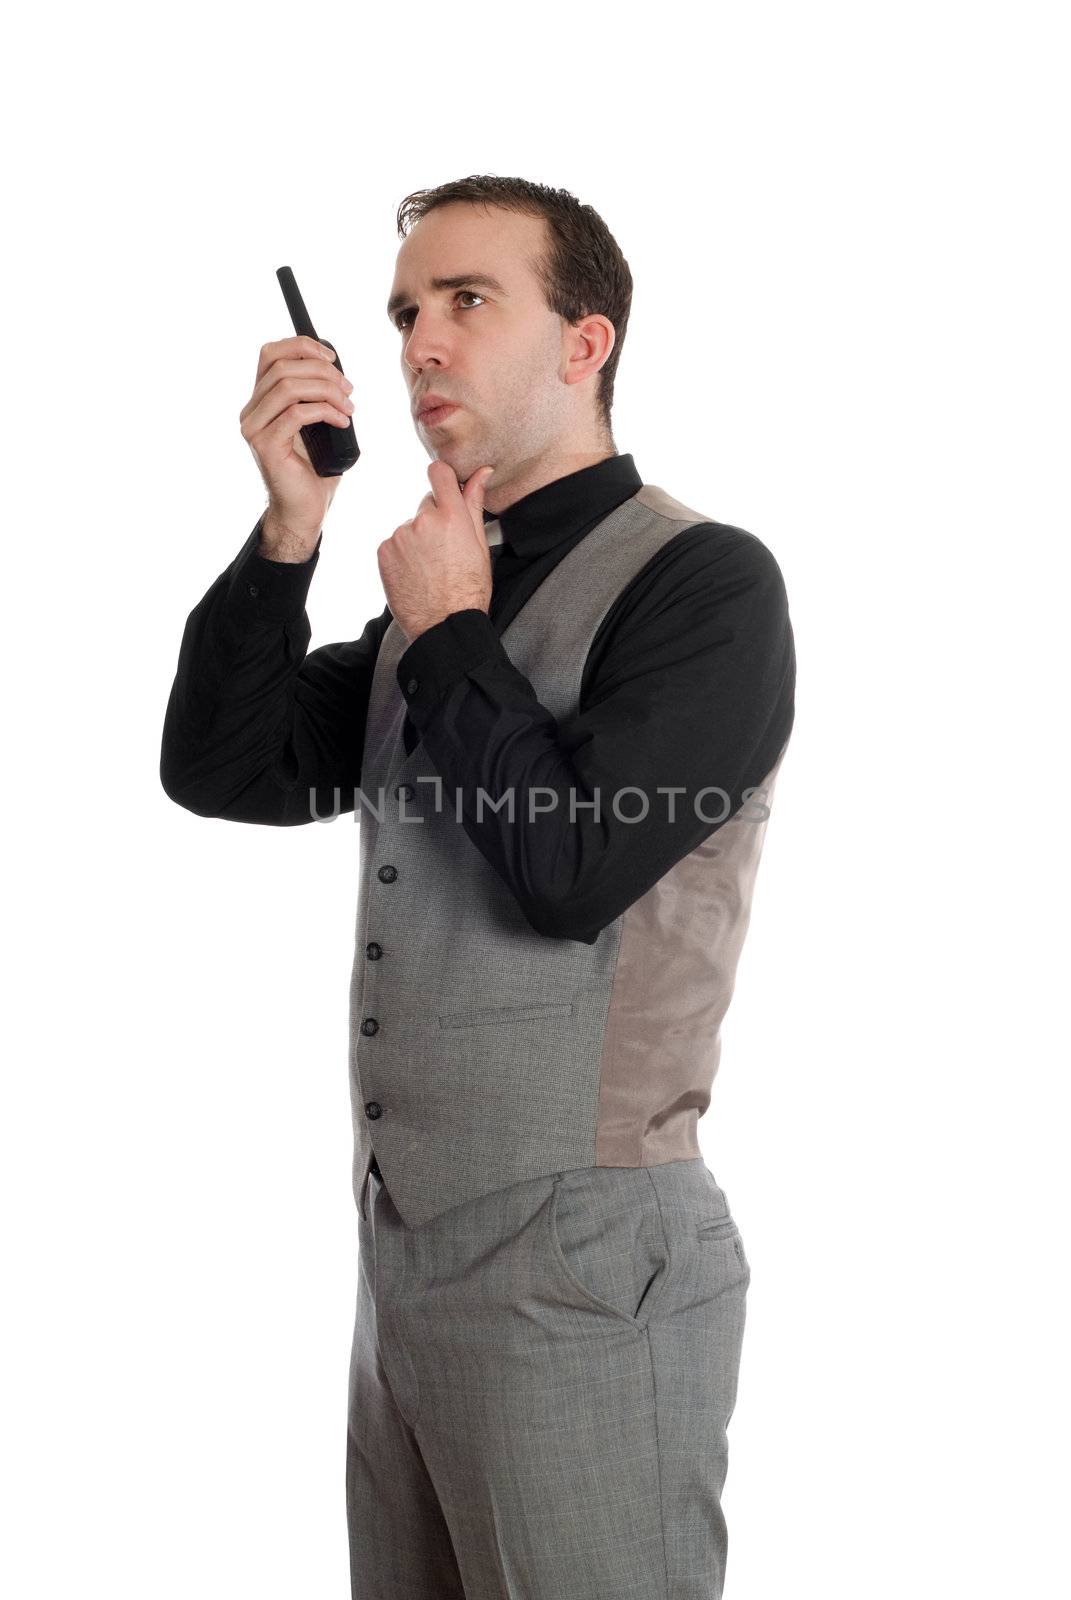 A young businessman wearing a grey suit, talking on a walkie talkie, isolated against a white background